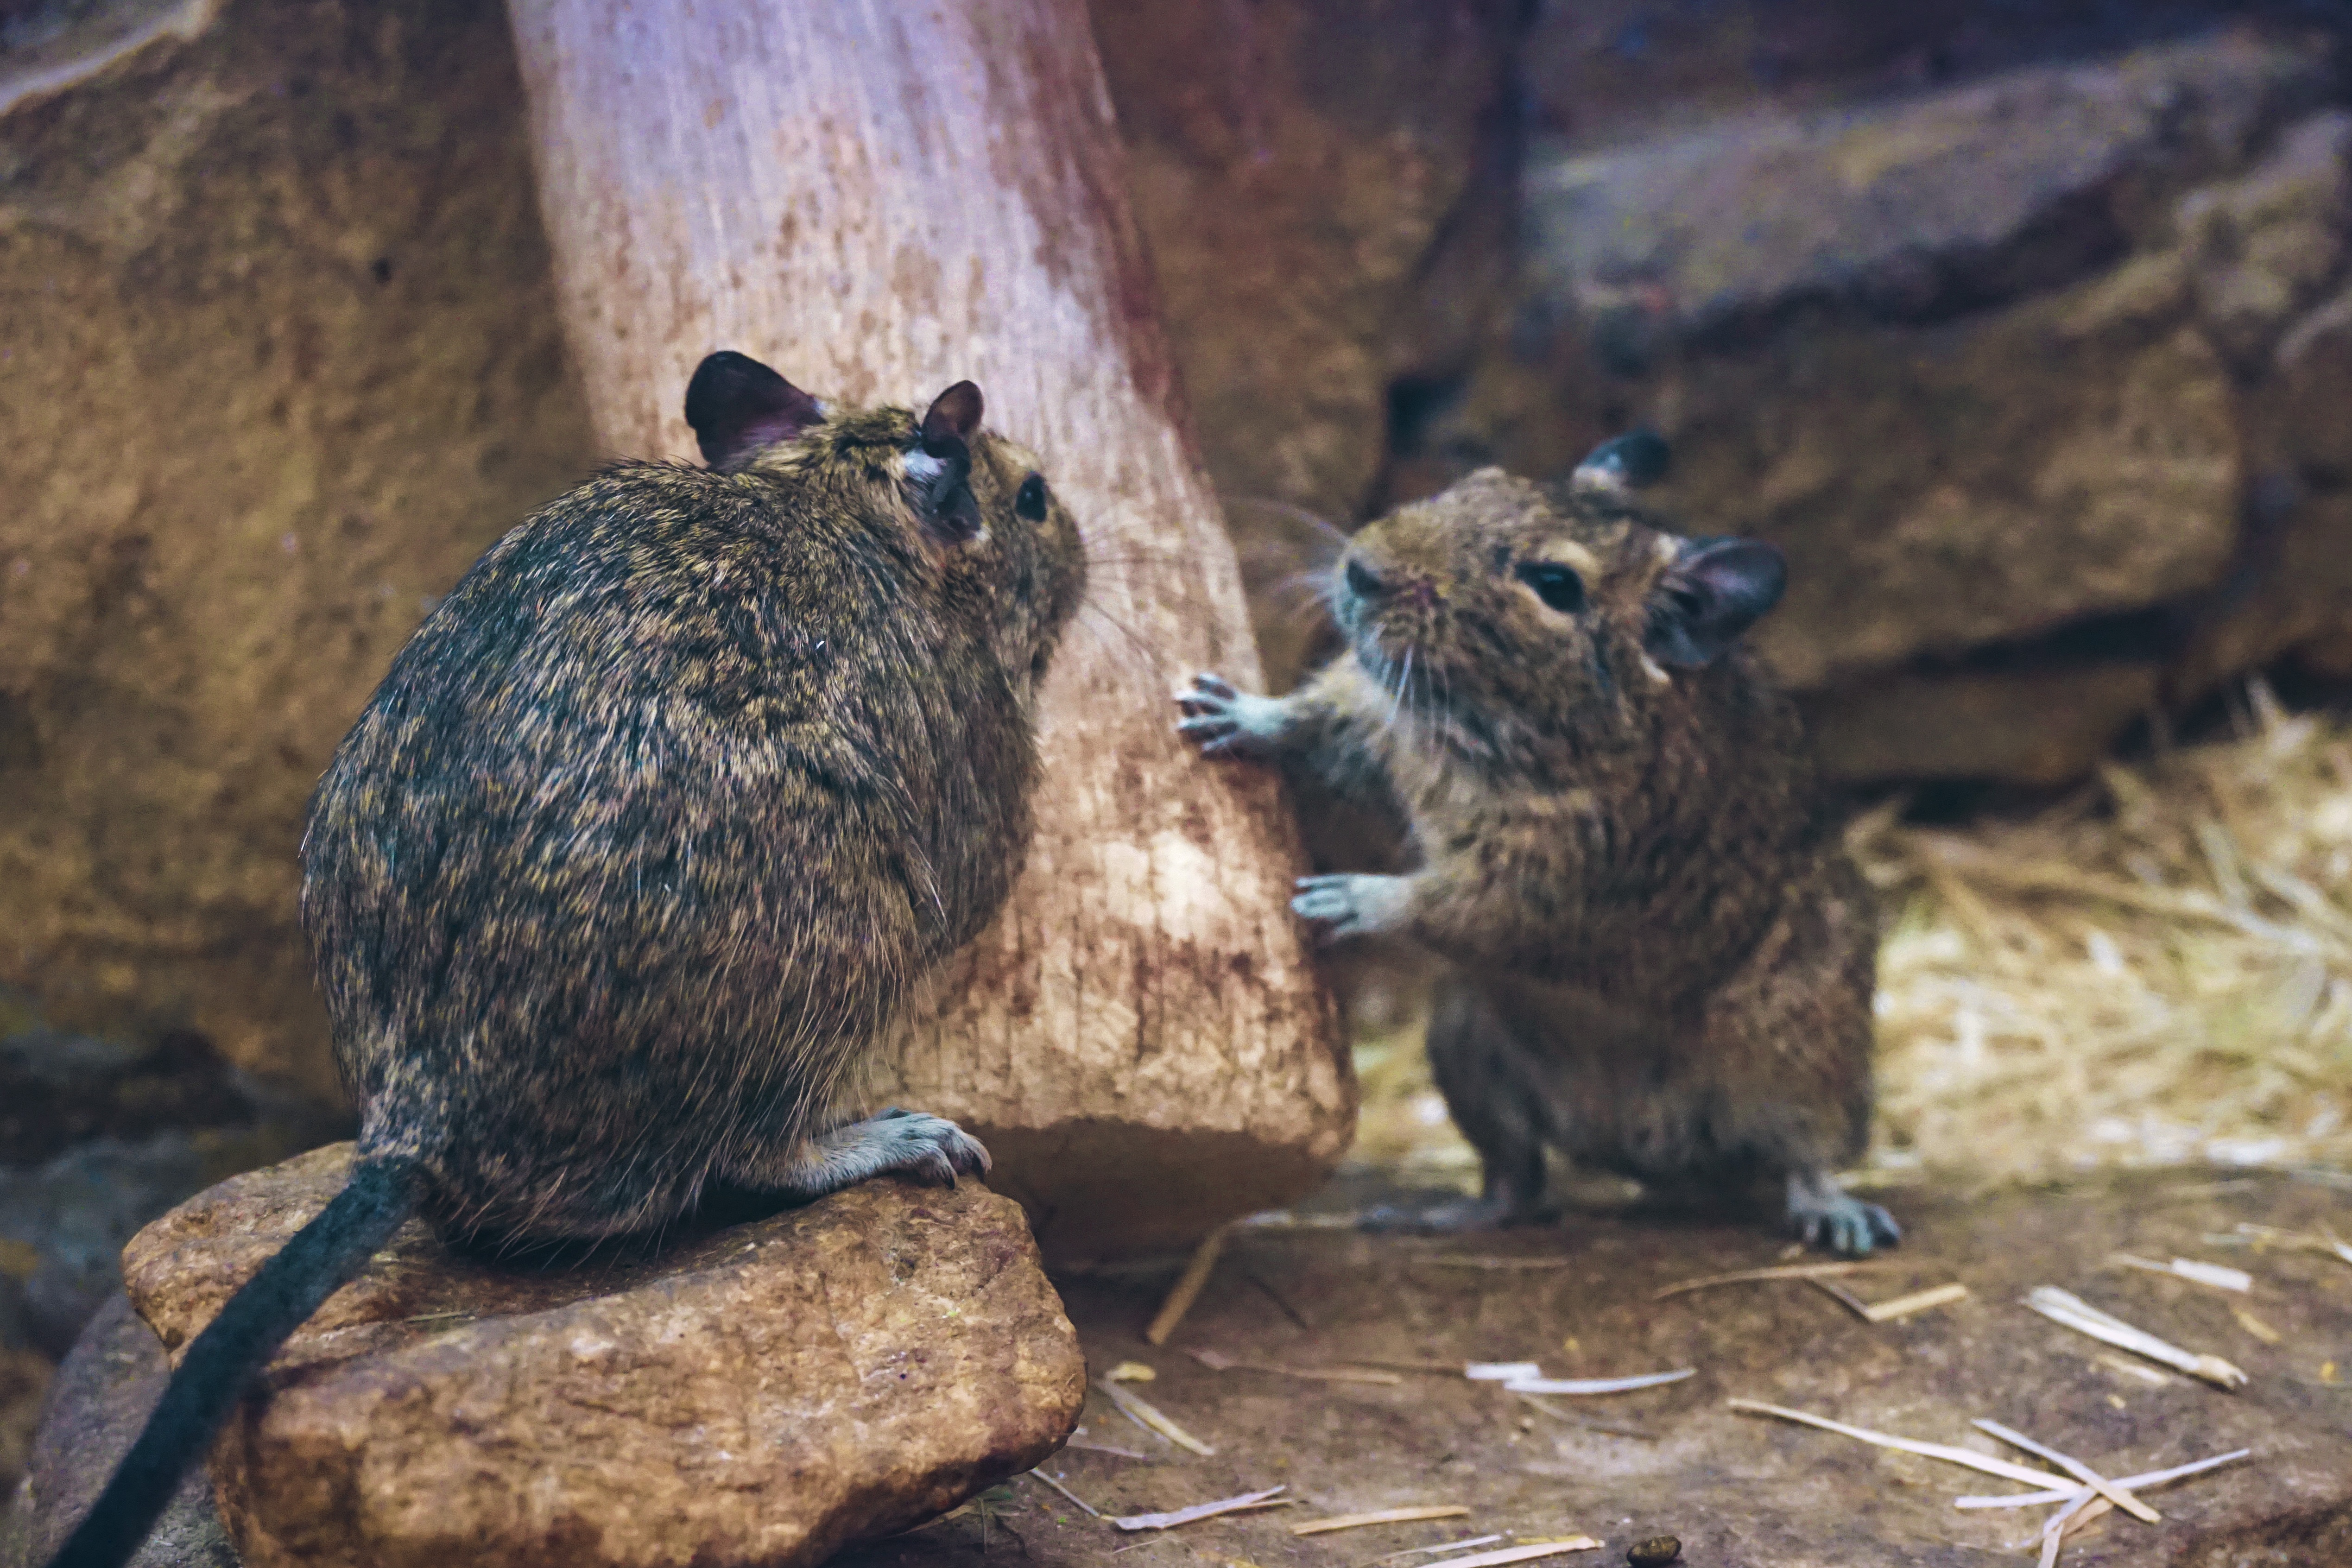 two black-and-brown rodents communicating